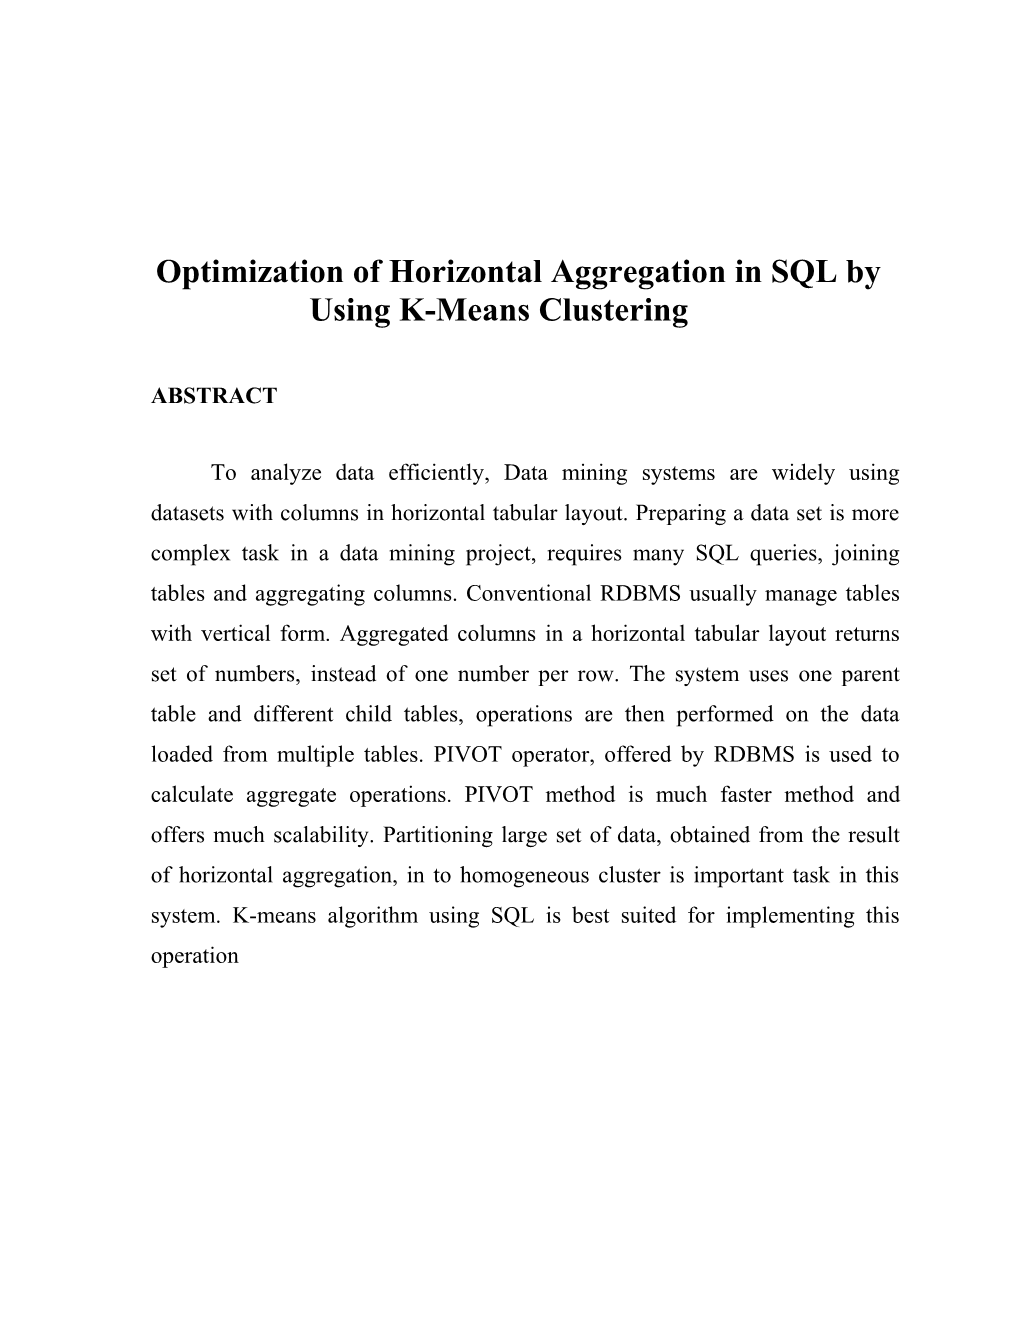 Optimization of Horizontal Aggregation in SQL By